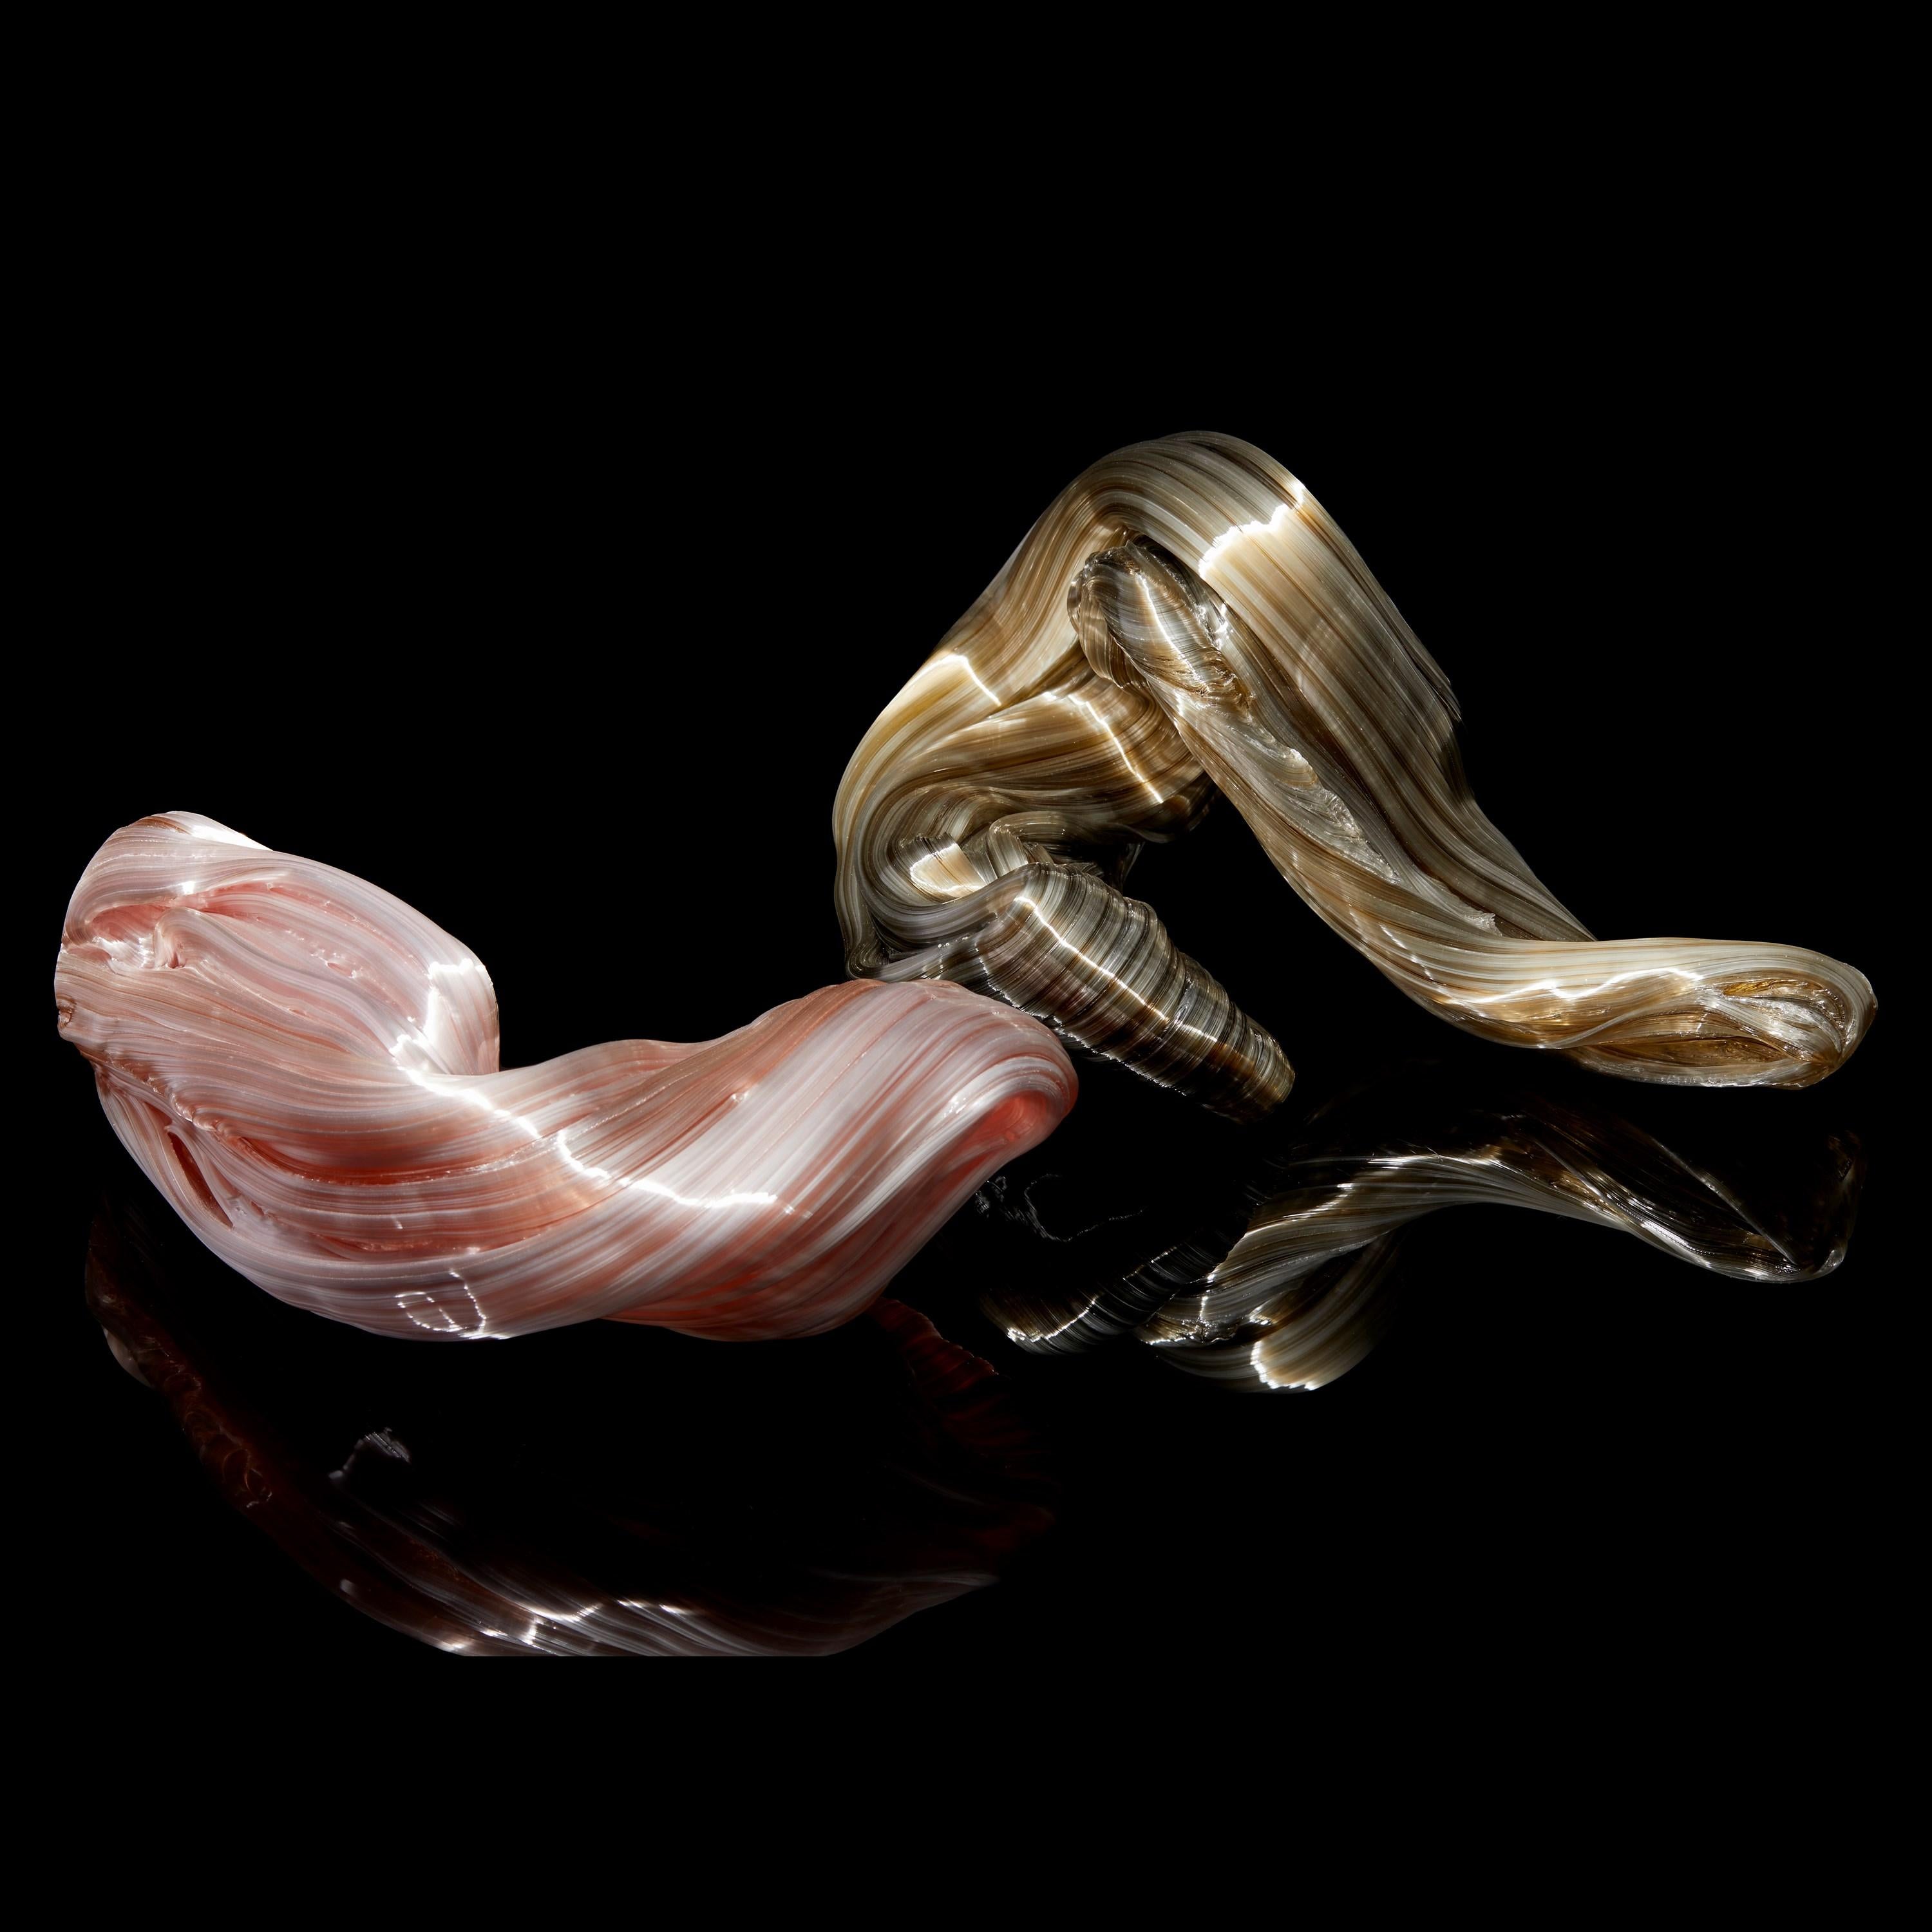 Contemporary Curve in Coral, a Unique coral pink Glass Sculpture by Maria Bang Espersen